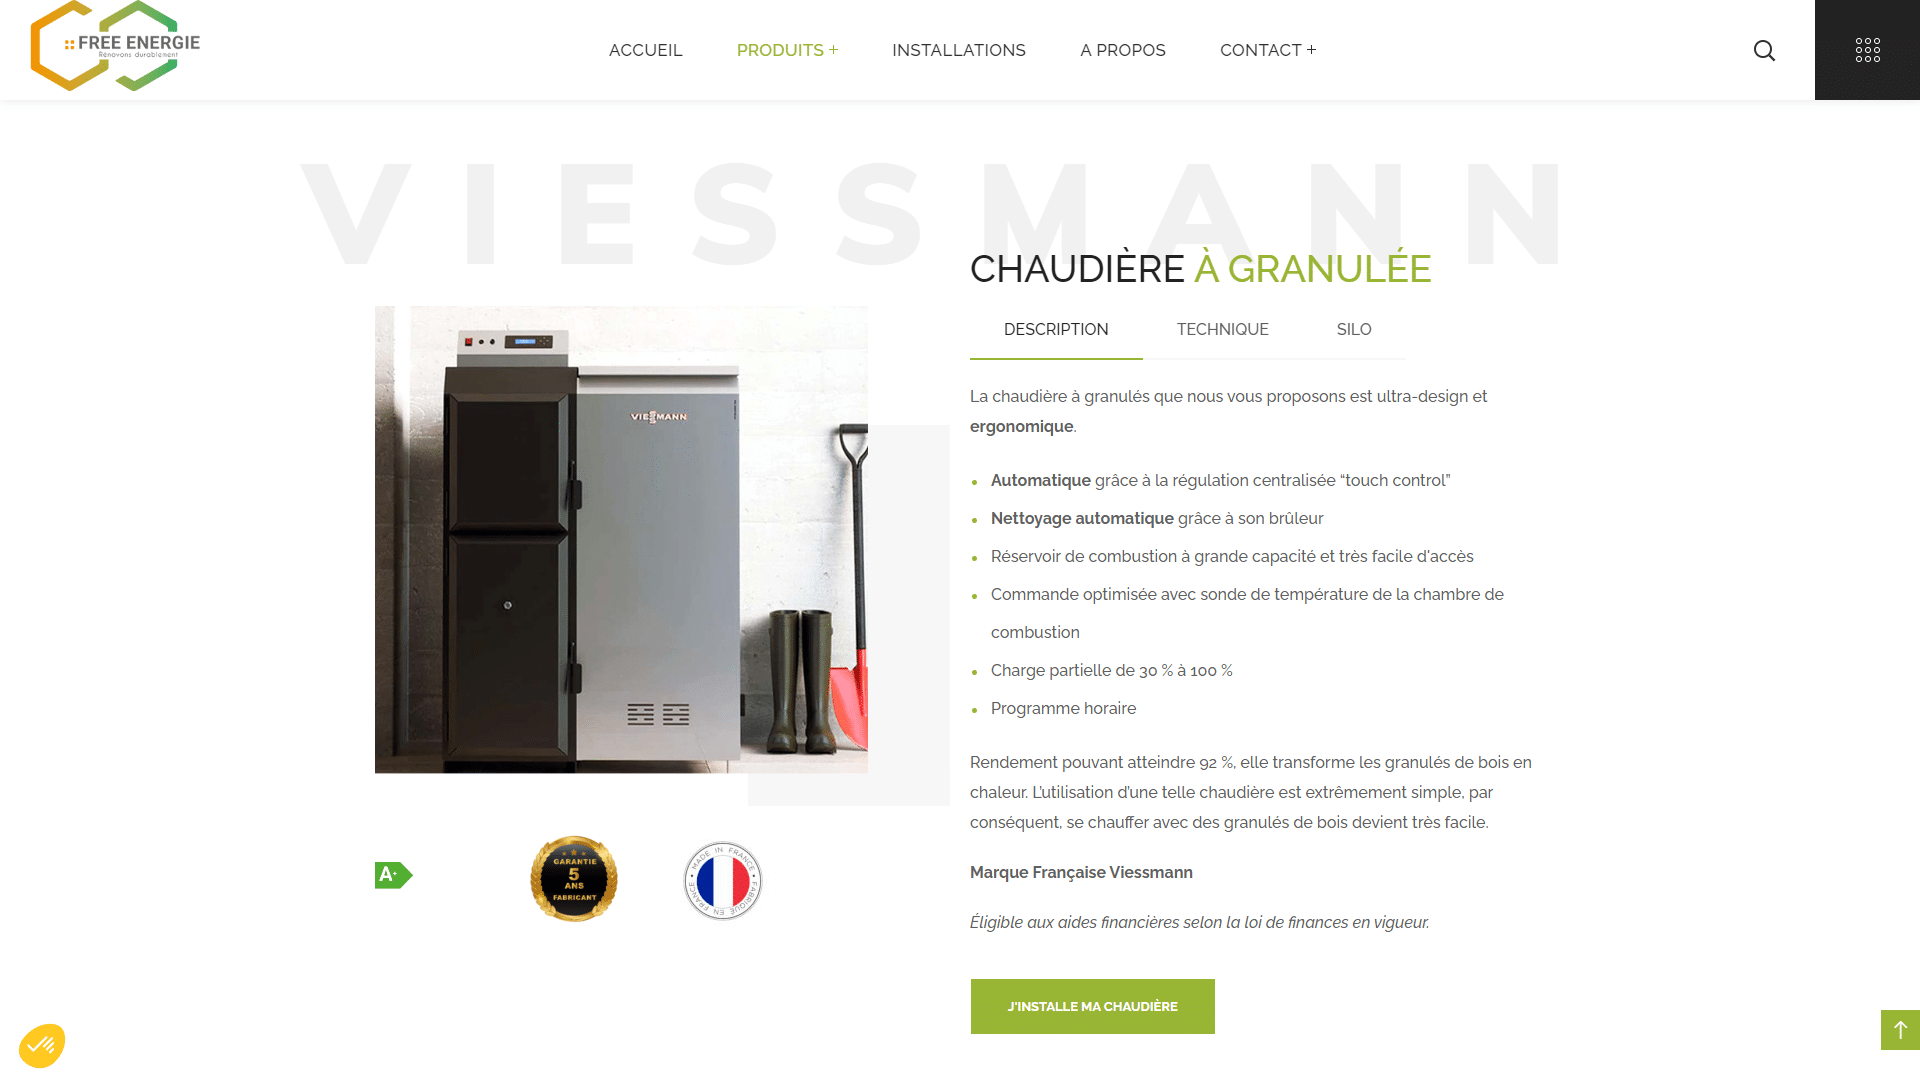 www.freeenergie.fr_chaudieres-a-granules_PC-1